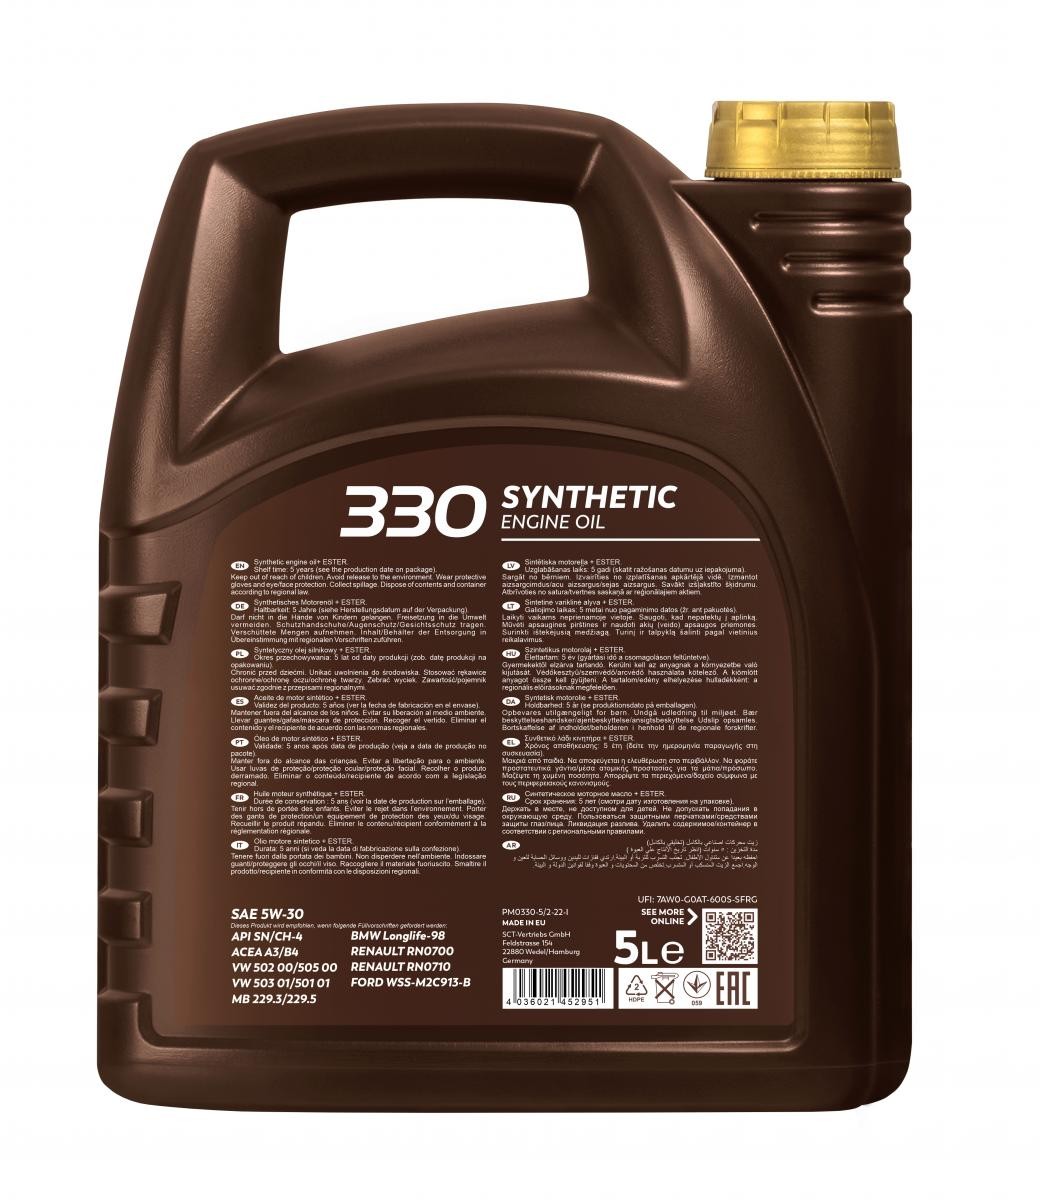 208L Mannol Fully Synthetic Engine Oil Longlife 3 5w30 LL-04 AUDI